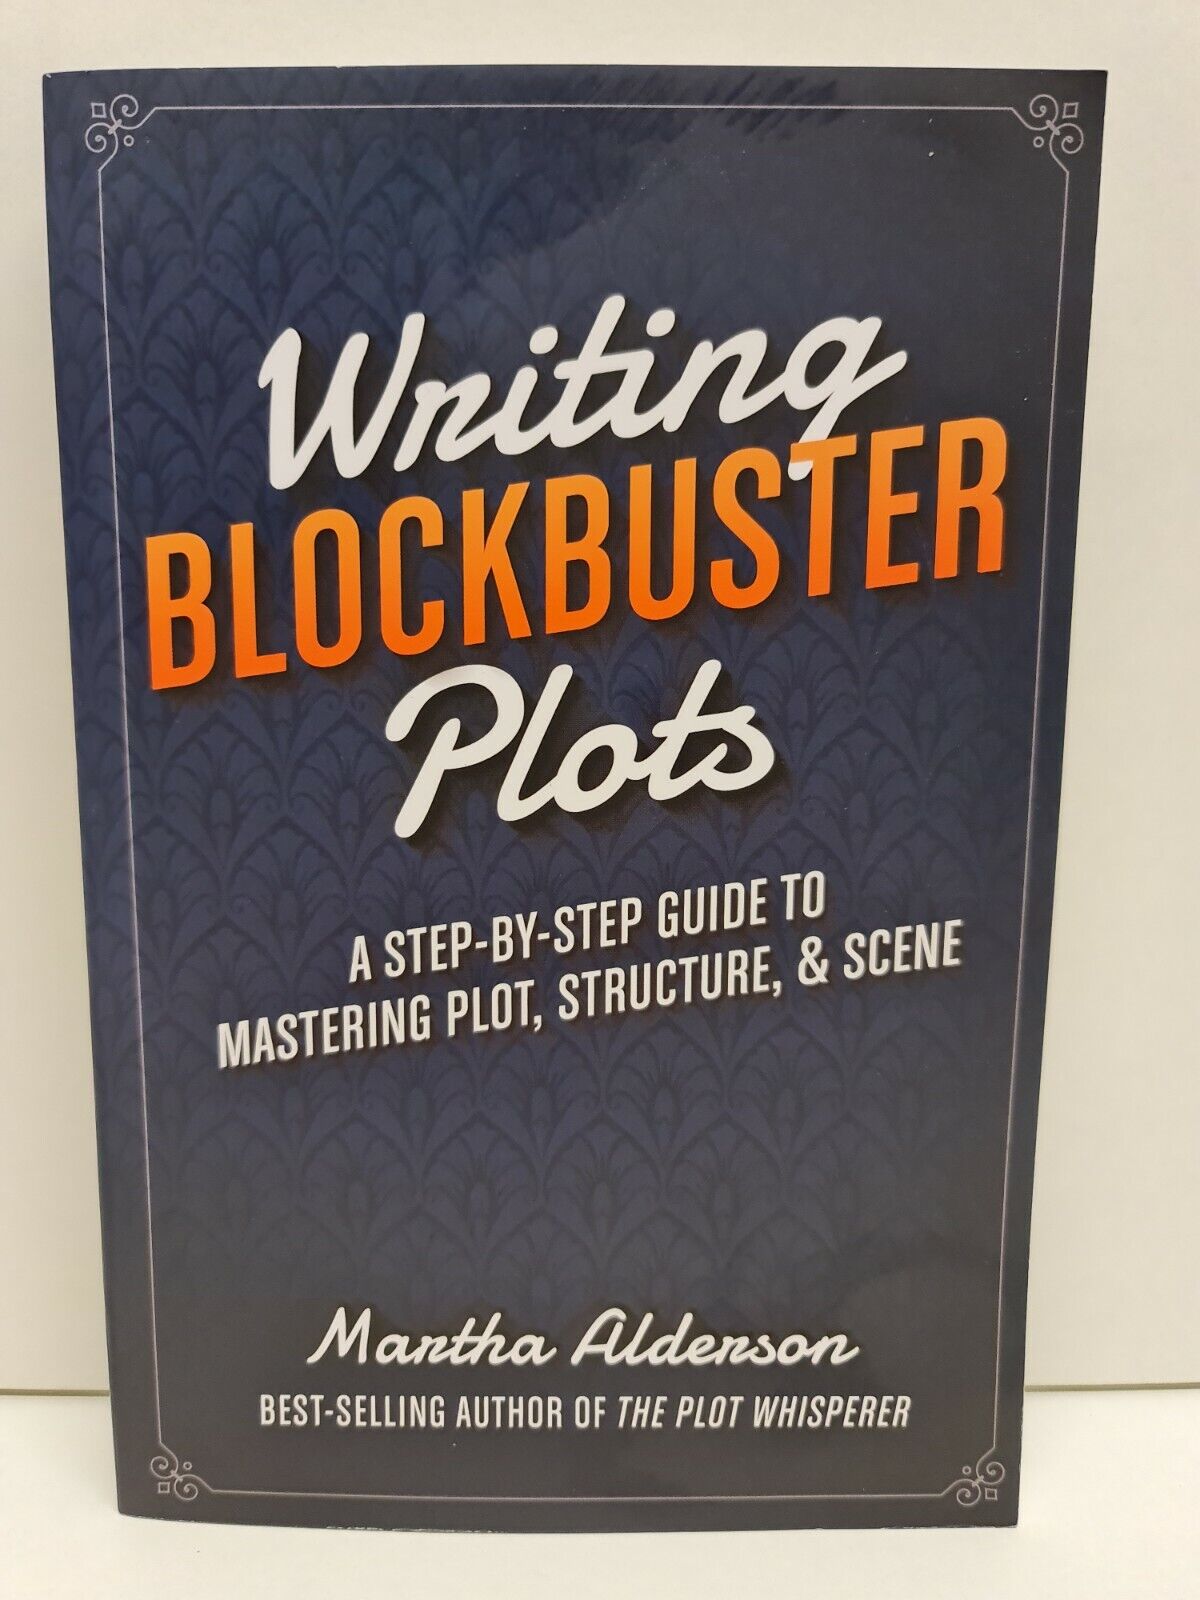 Writing Blockbuster Plots: Step-by-Step Guide to Mastering Plot, Structure...